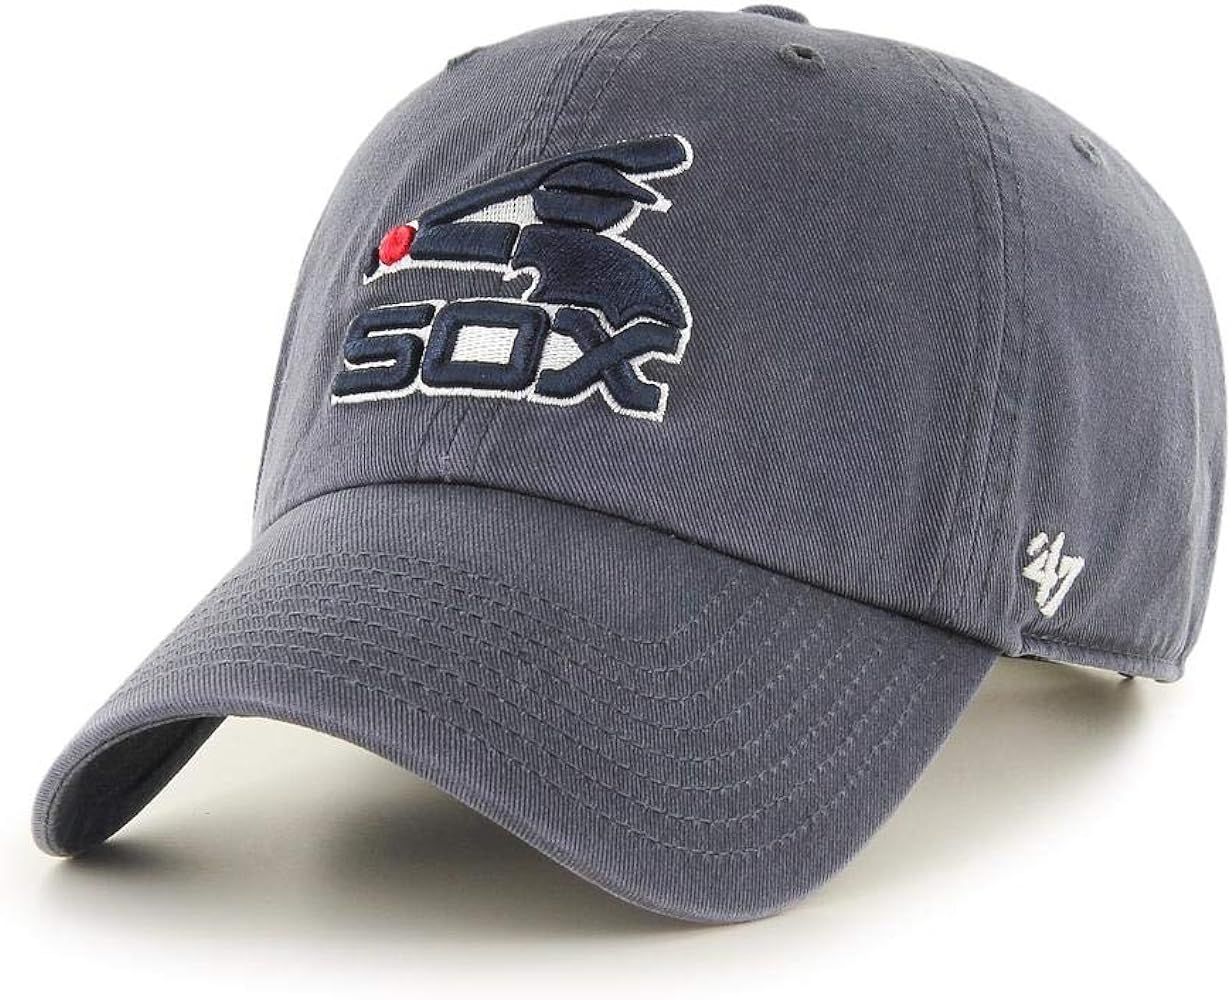 '47 Chicago White Sox Cooperstown Clean Up Hat Baseball Cap - Vintage Navy | Amazon (US)